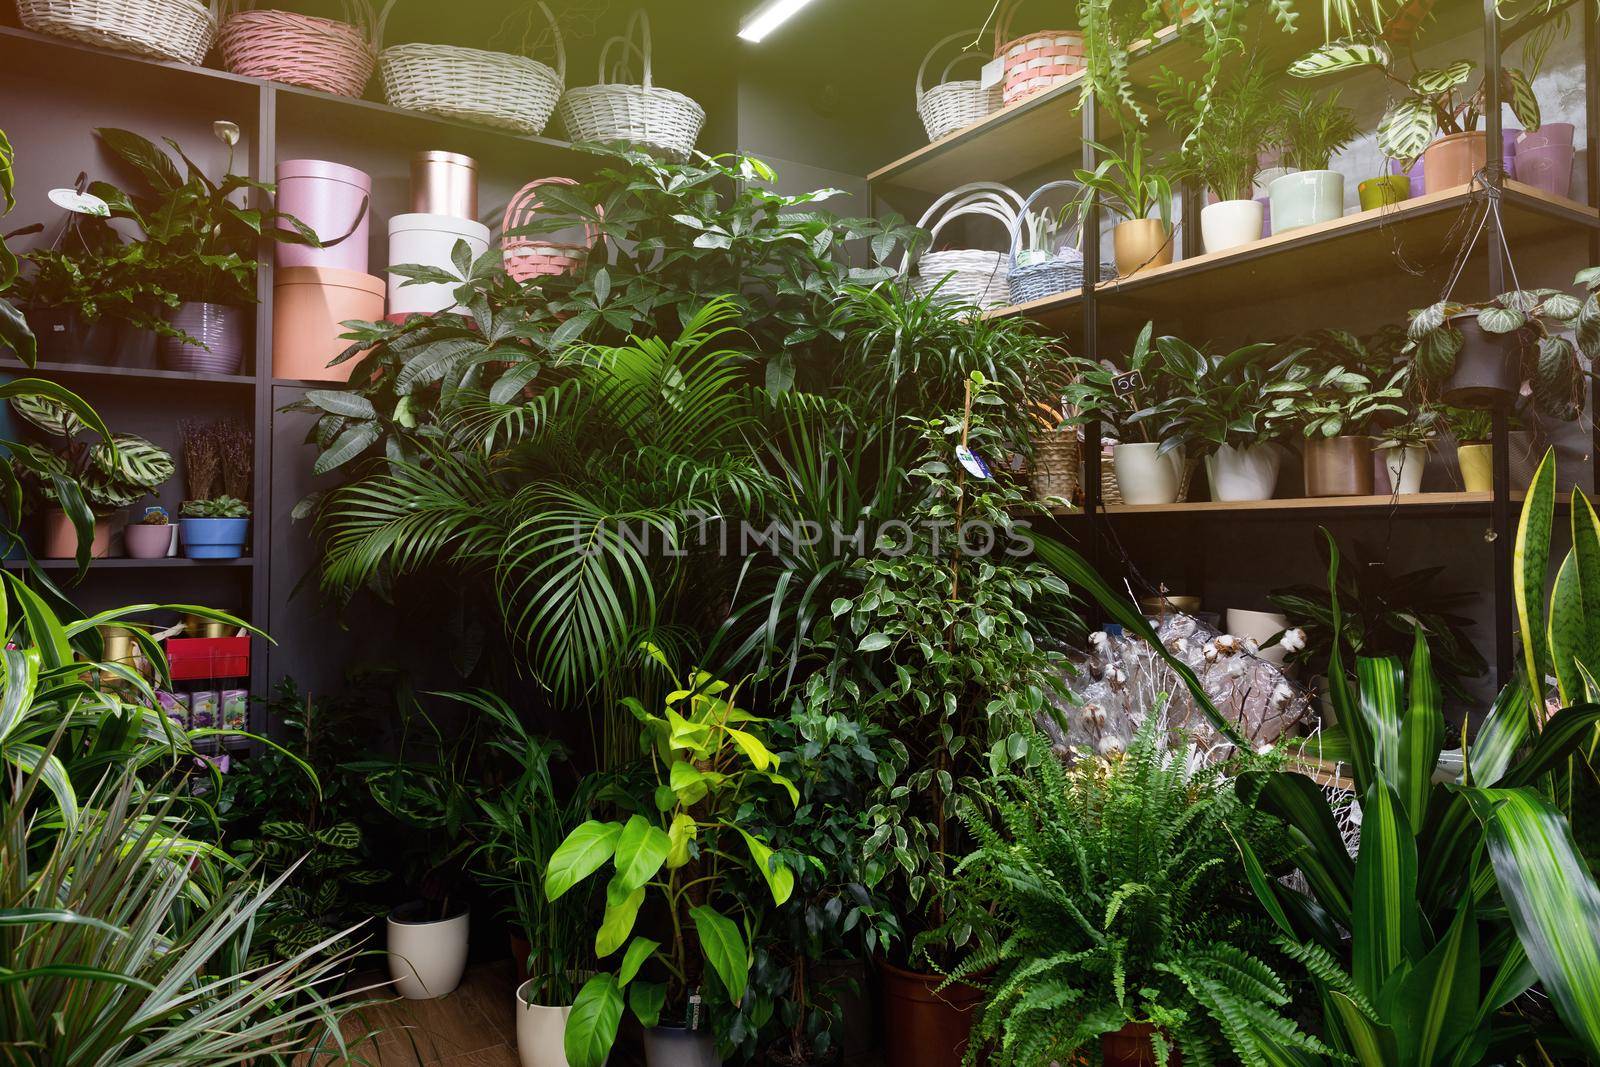 florist shop with exotic flower plants and greenery